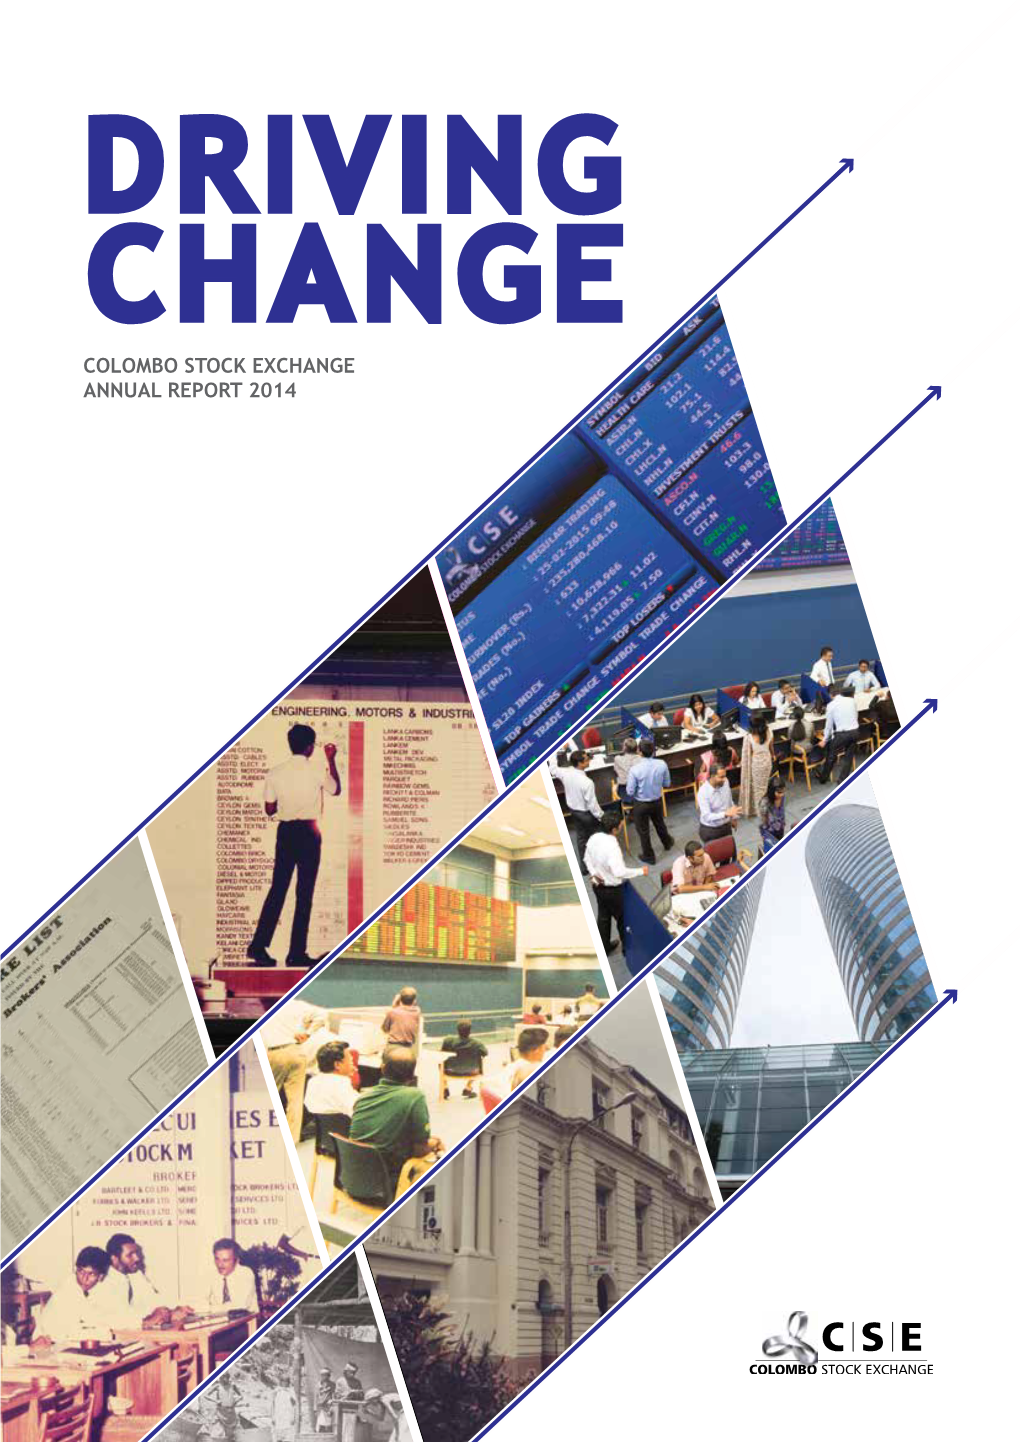 Colombo Stock Exchange Annual Report 2014 the Annual Report for 2014 Details the Colombo Stock Exchange’S Performance During the Year Under Review